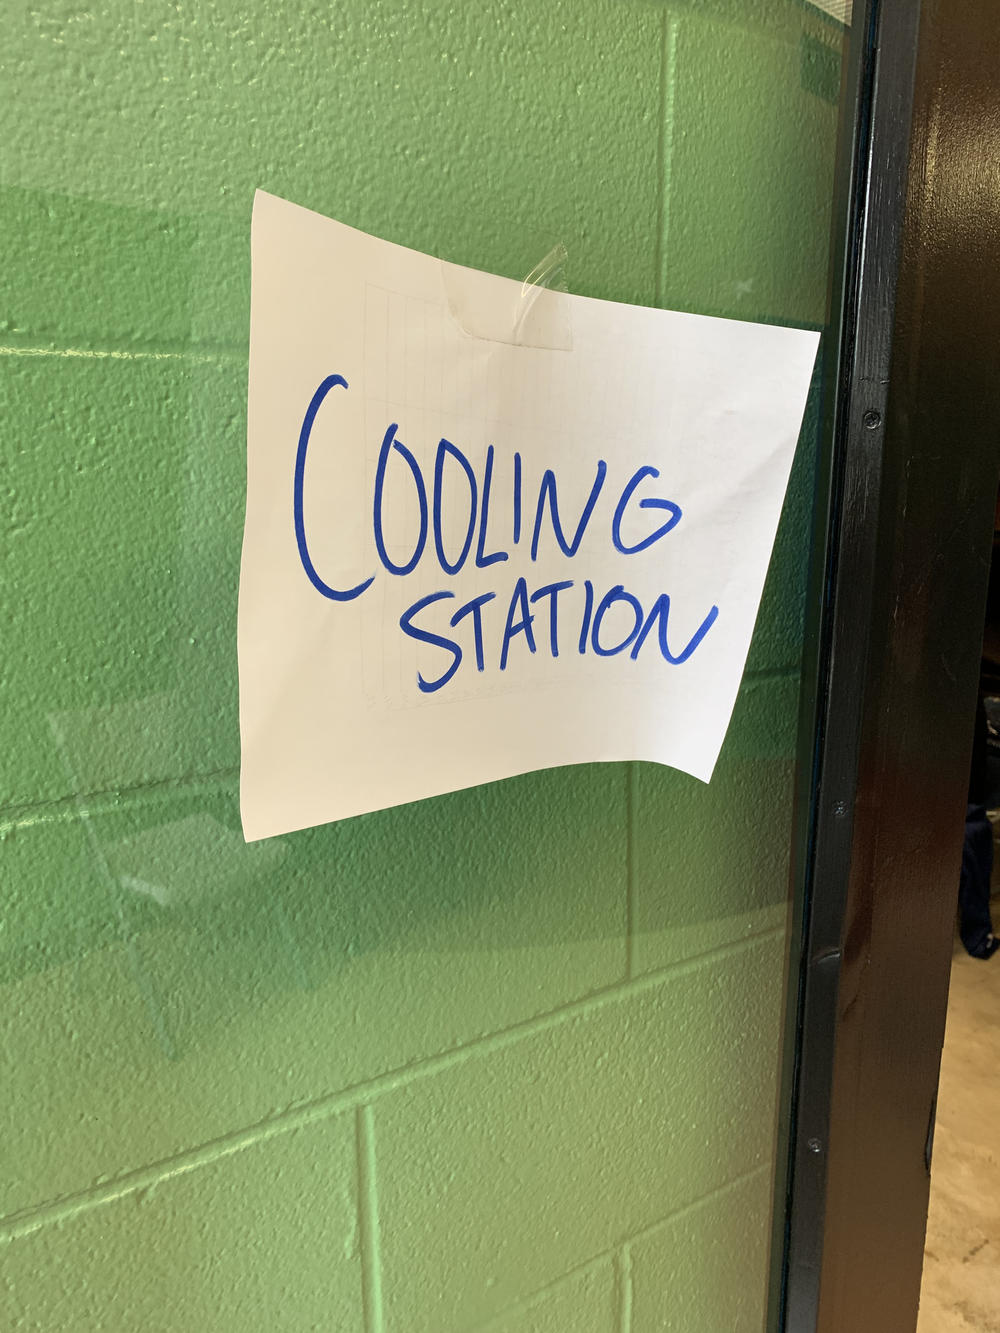 A cooling station sign at the Rosenwald Recreational Center in New Orleans. Recently, heat-related calls to the city's emergency medical services have more than tripled, compared to last summer.